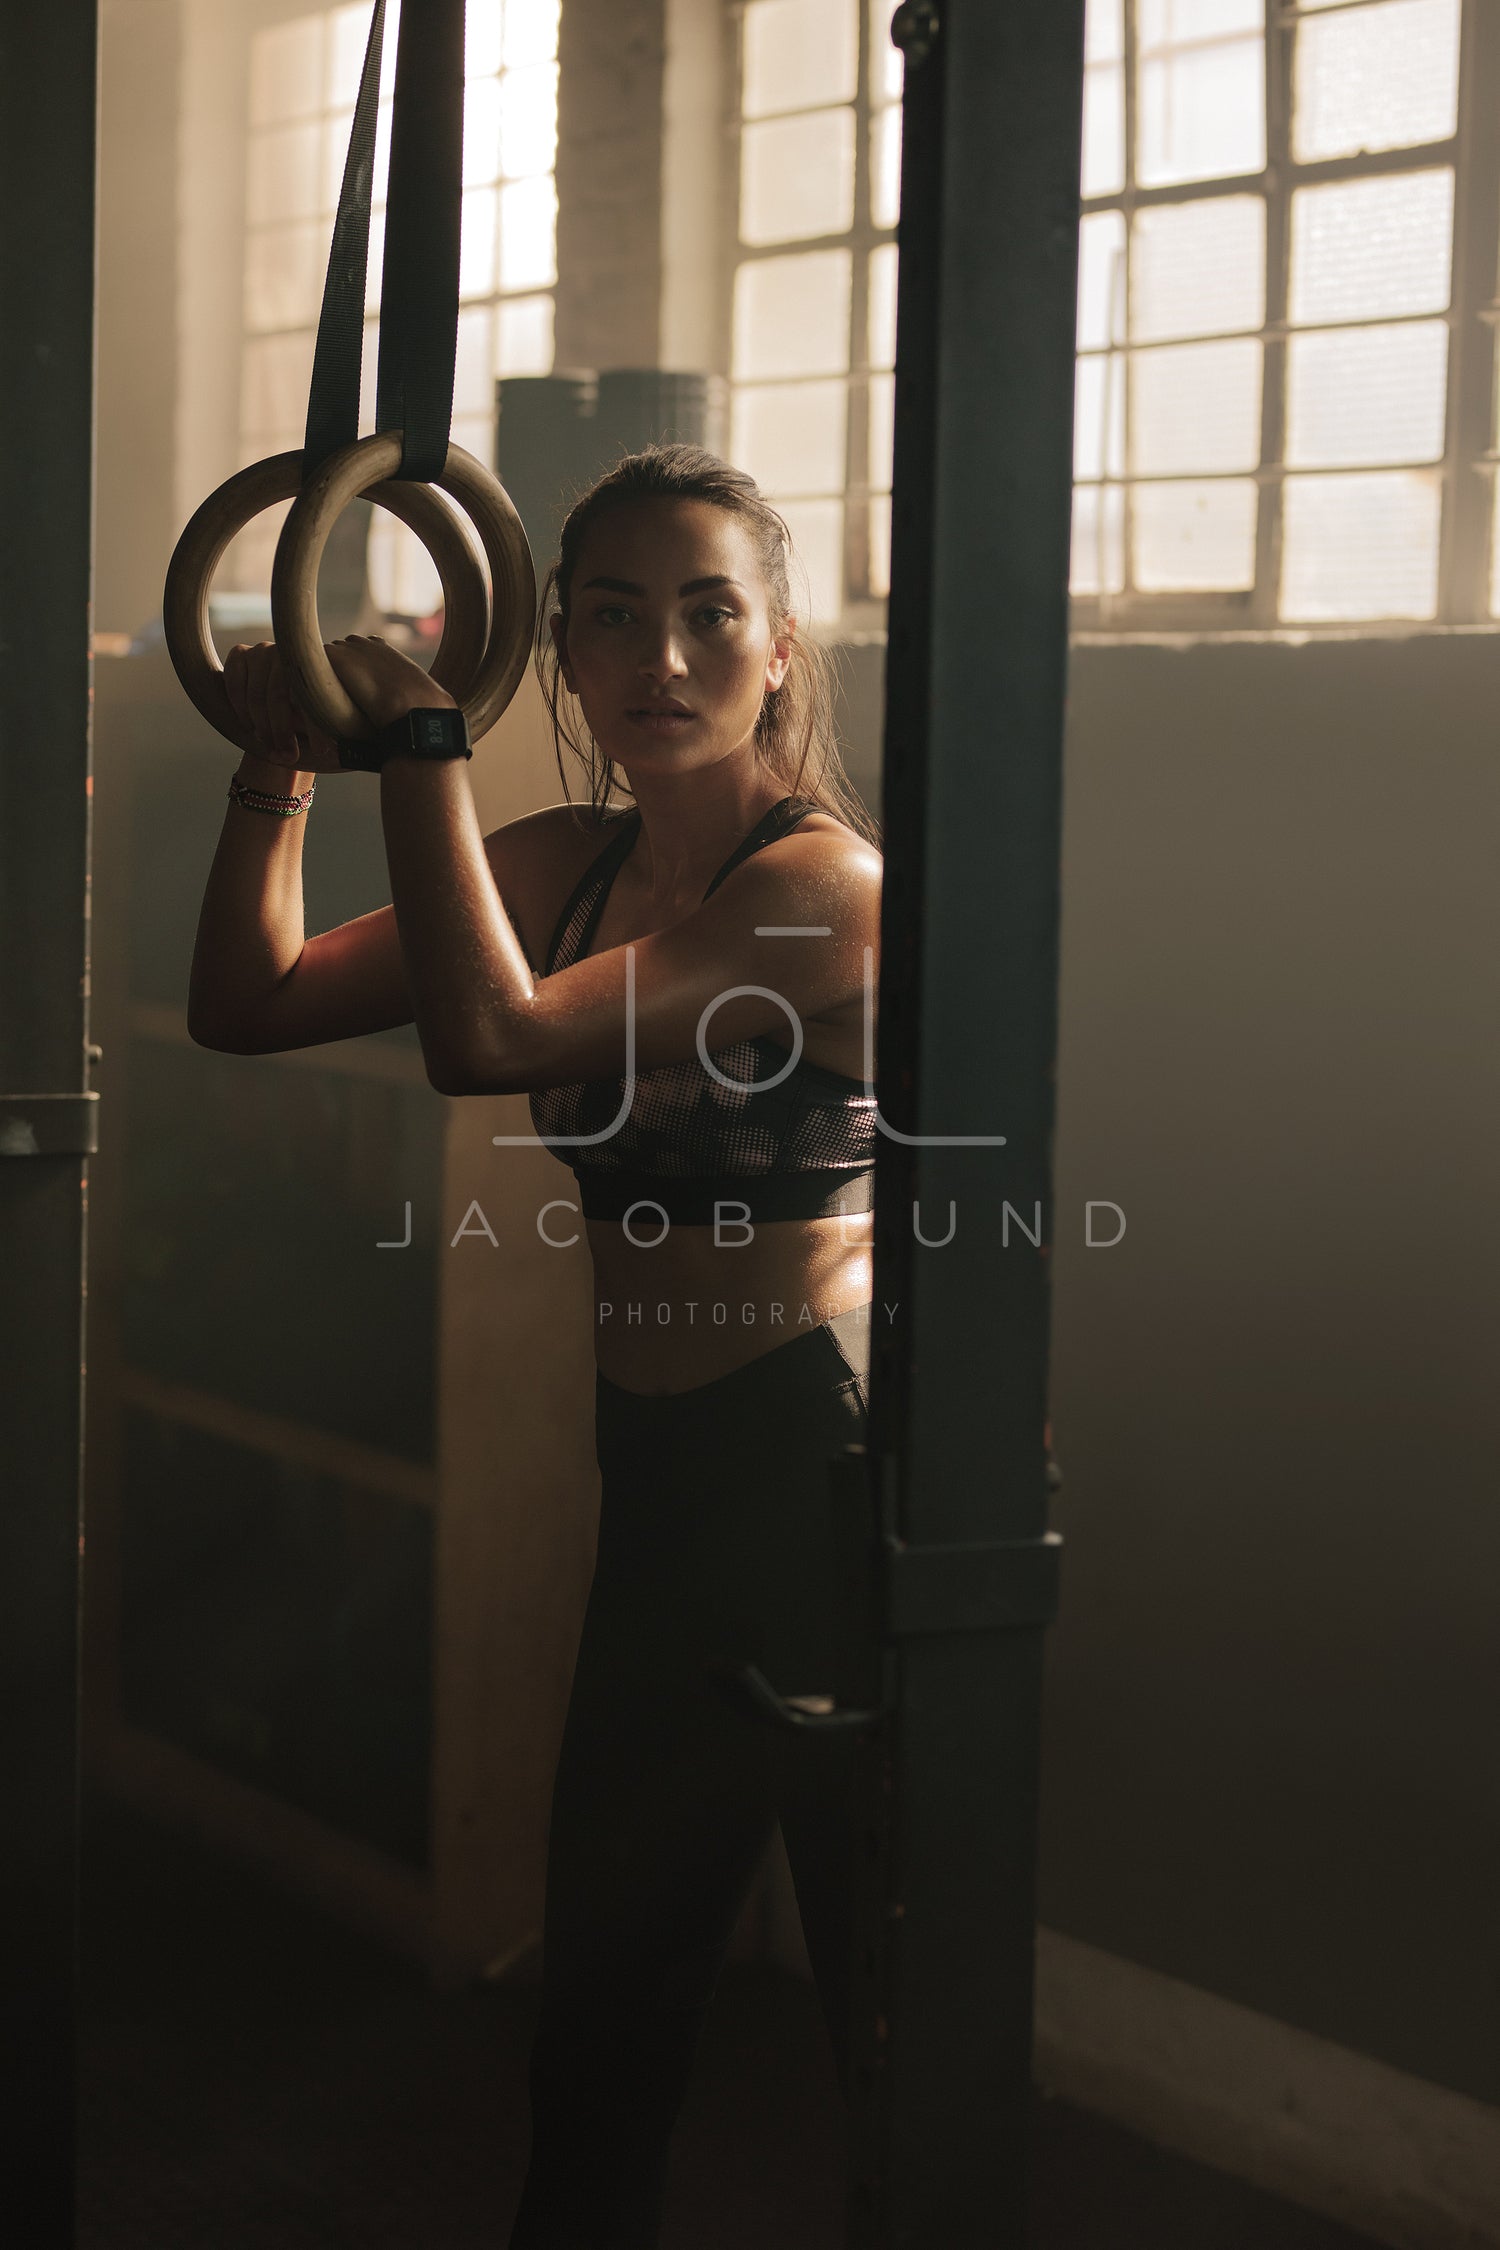 Fitness woman exercising with gymnastic rings Stock Photo by jacoblund